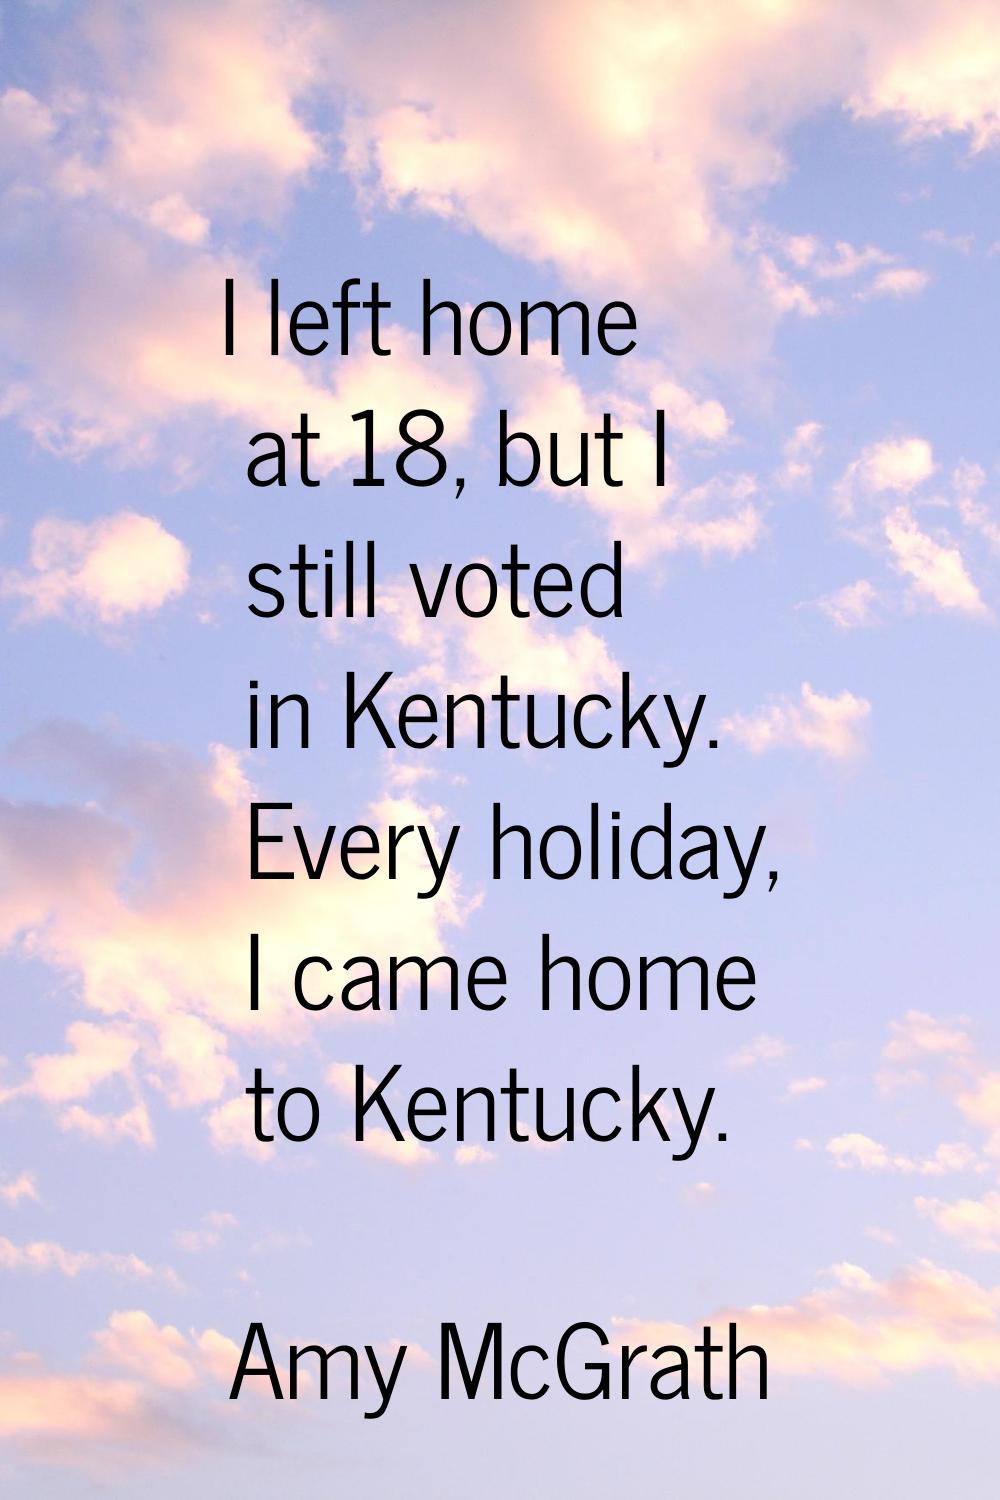 I left home at 18, but I still voted in Kentucky. Every holiday, I came home to Kentucky.